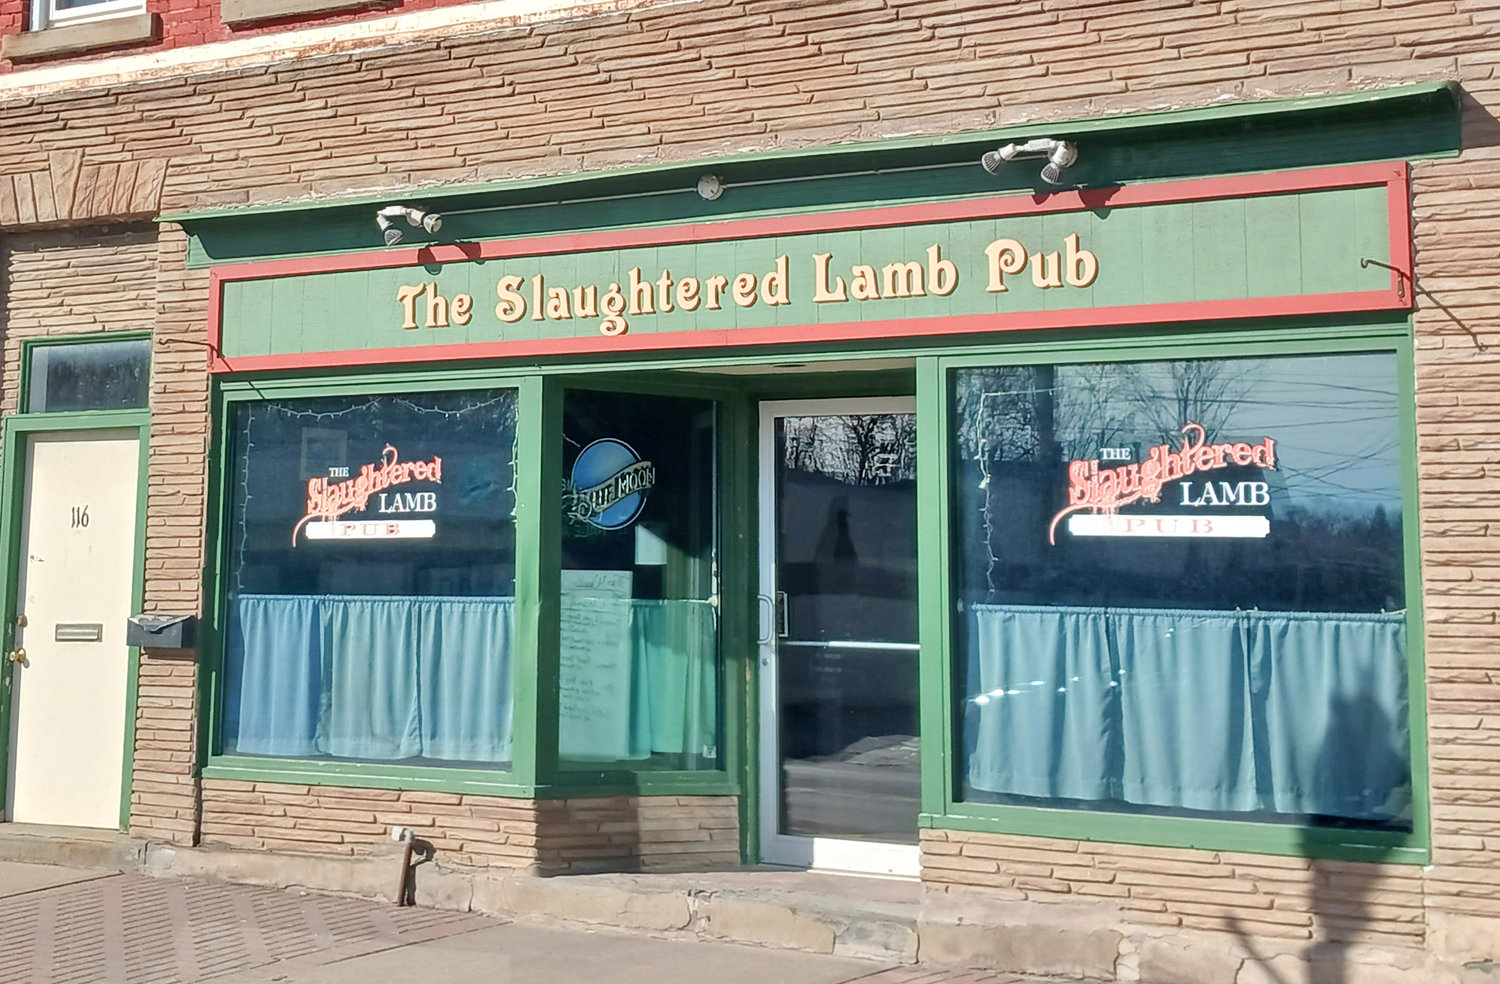 The Slaughtered Lamb Pub in Waterville serves good food made fresh daily in a friendly atmosphere.